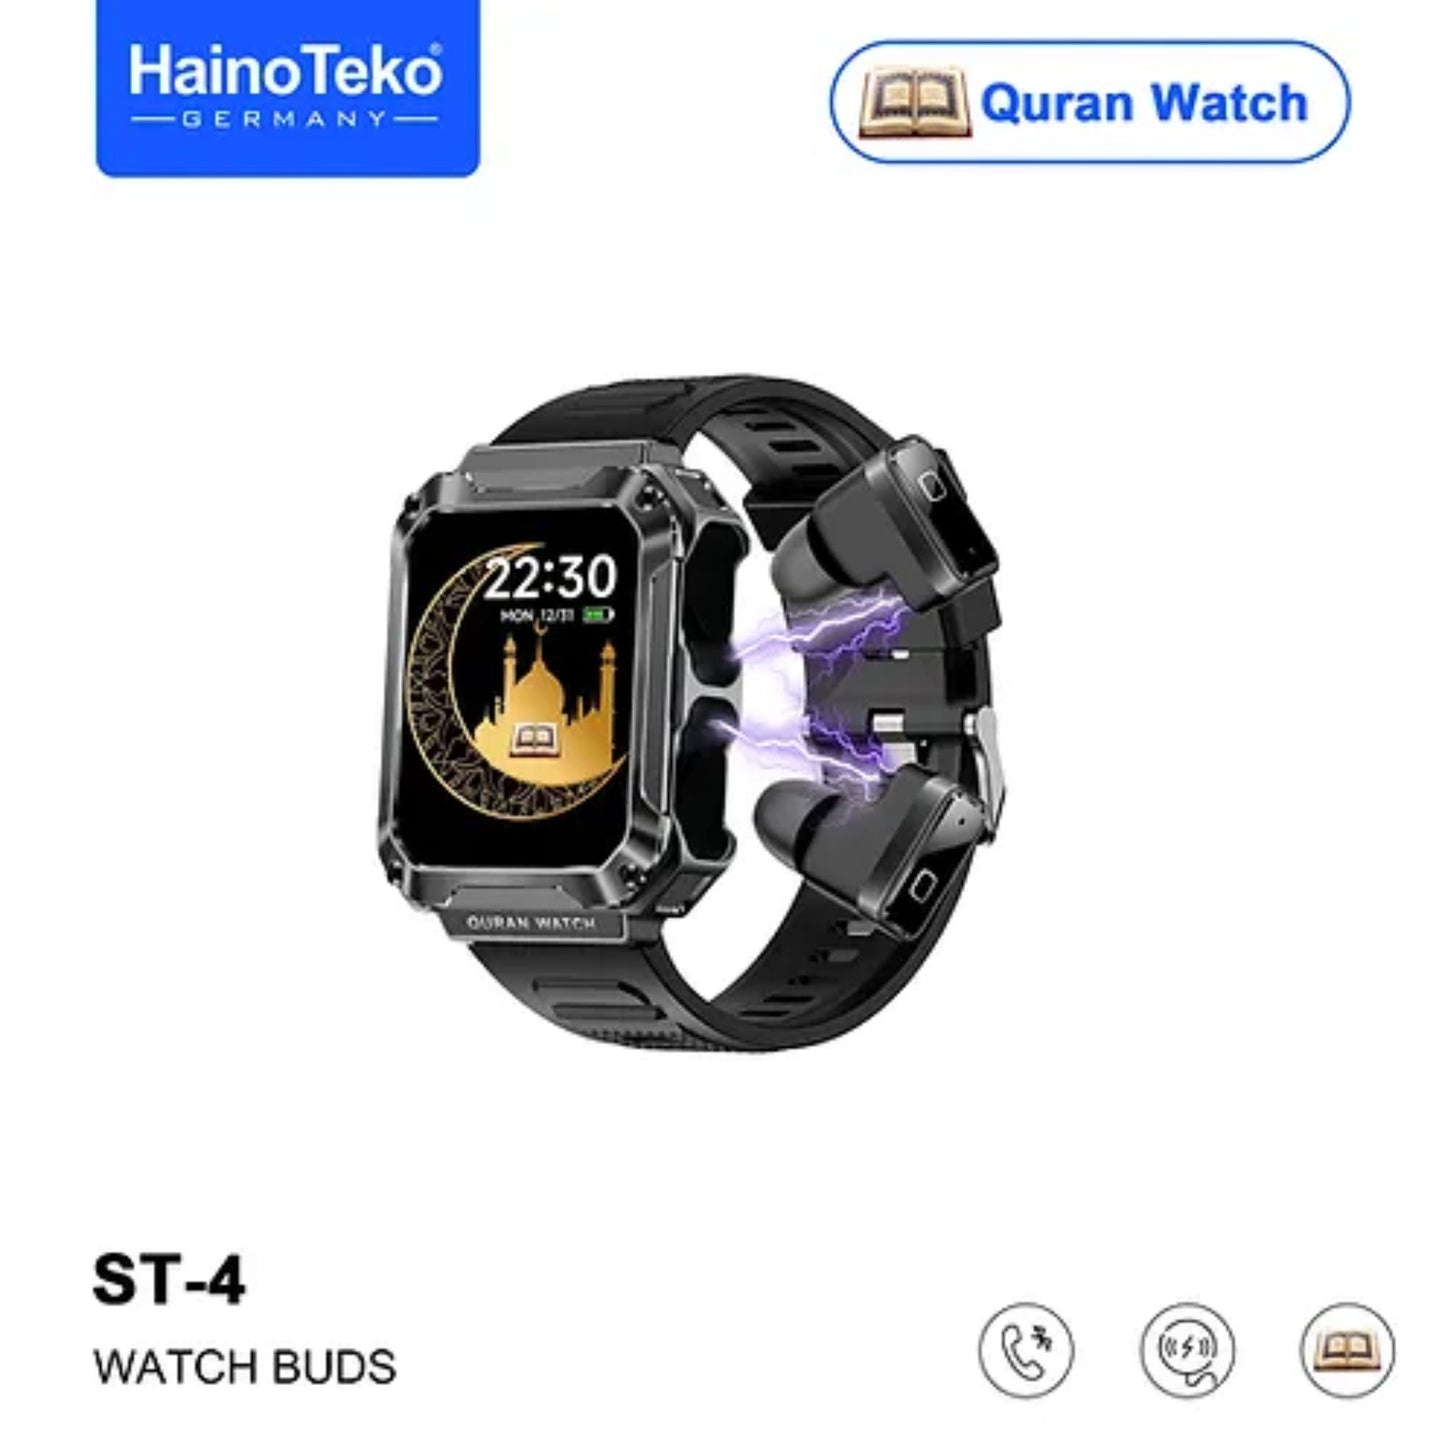 Top Tier Watch Buds ST-4 With Large Screen Square Shape AMOLED Display for Ladies and Gents_Black